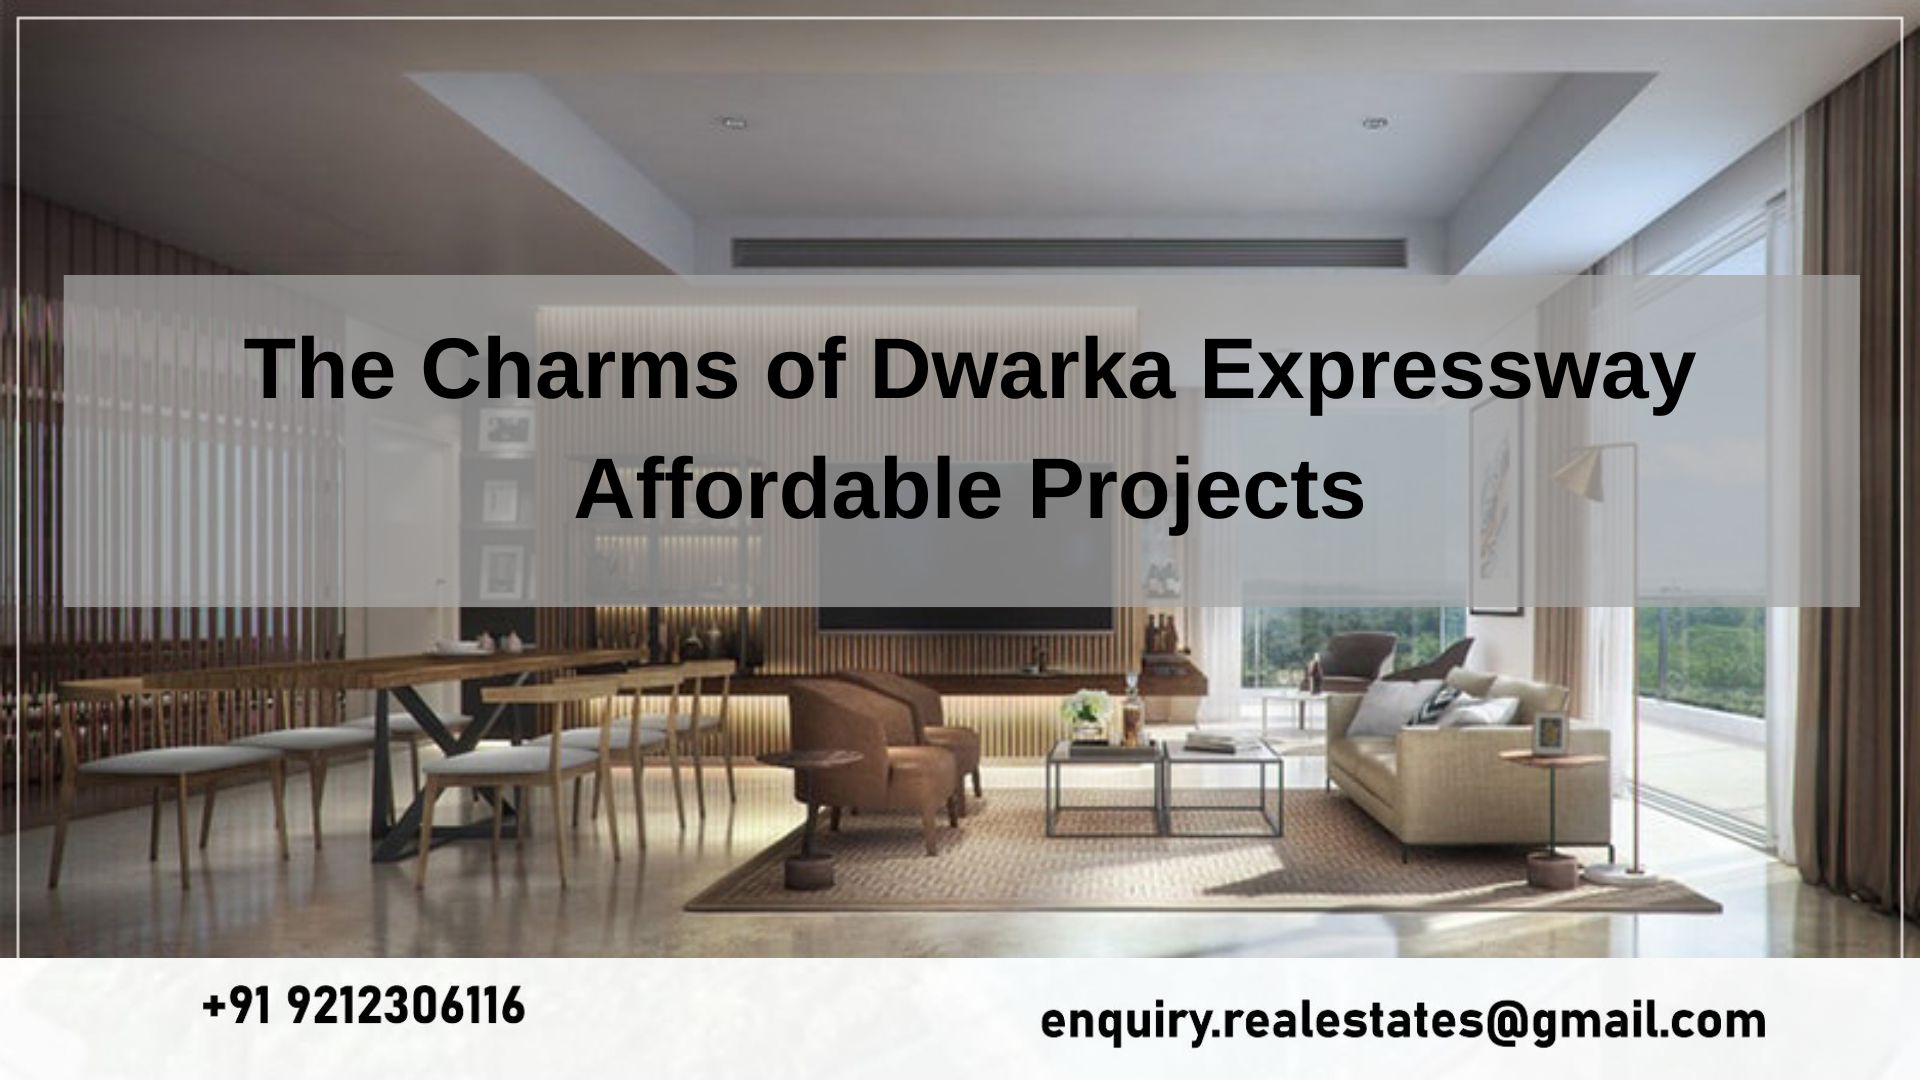 The Charms of Dwarka Expressway Affordable Projects